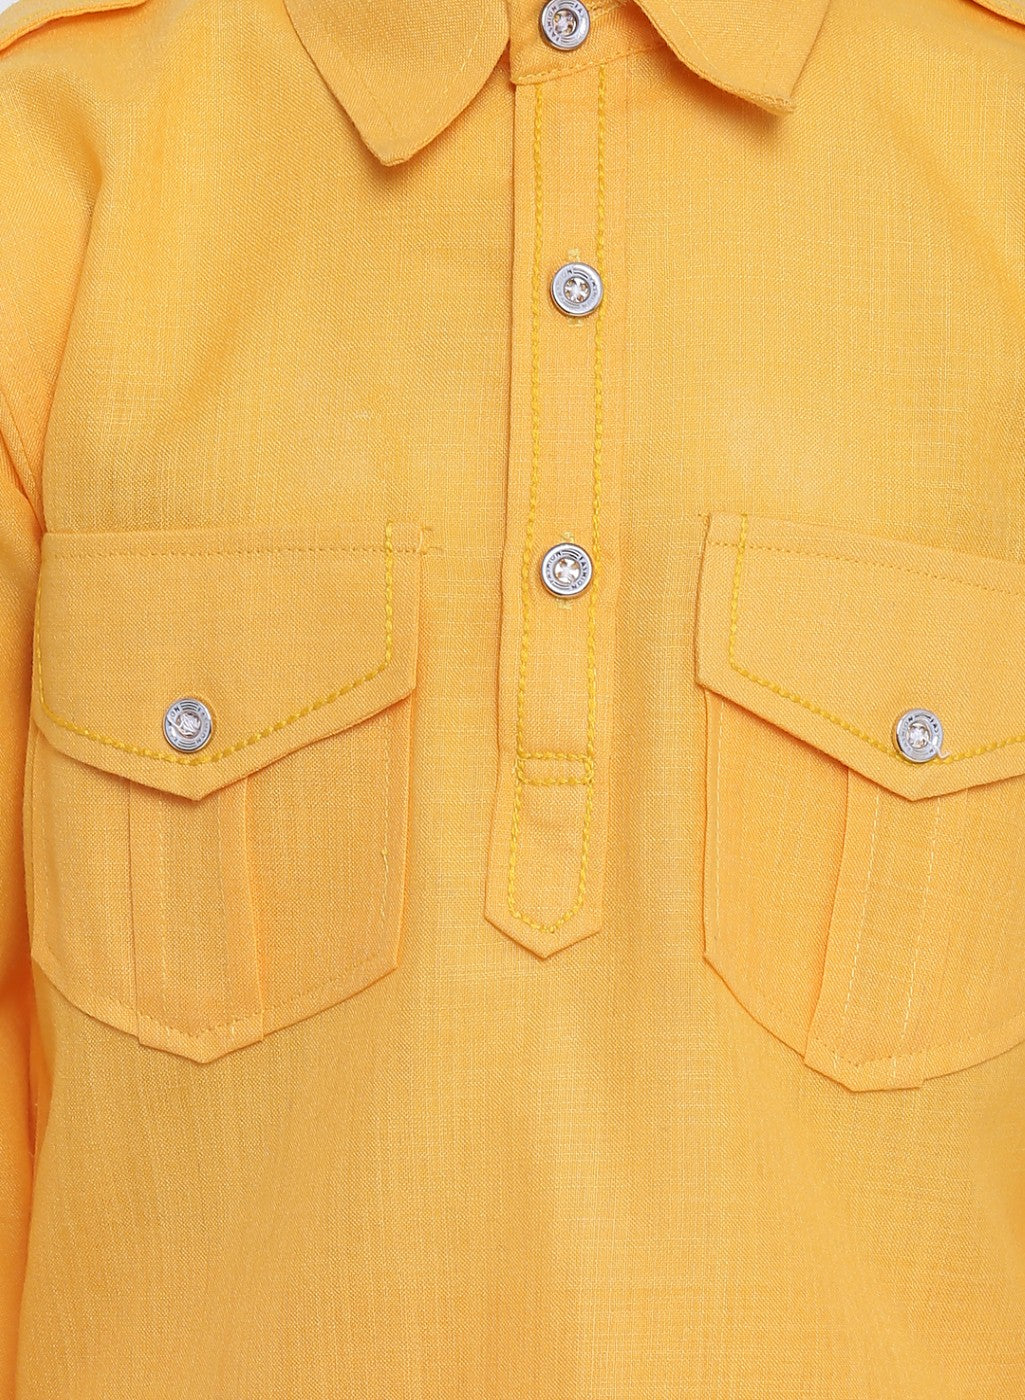 Boys Yellow Cotton Solid Pathani Suit